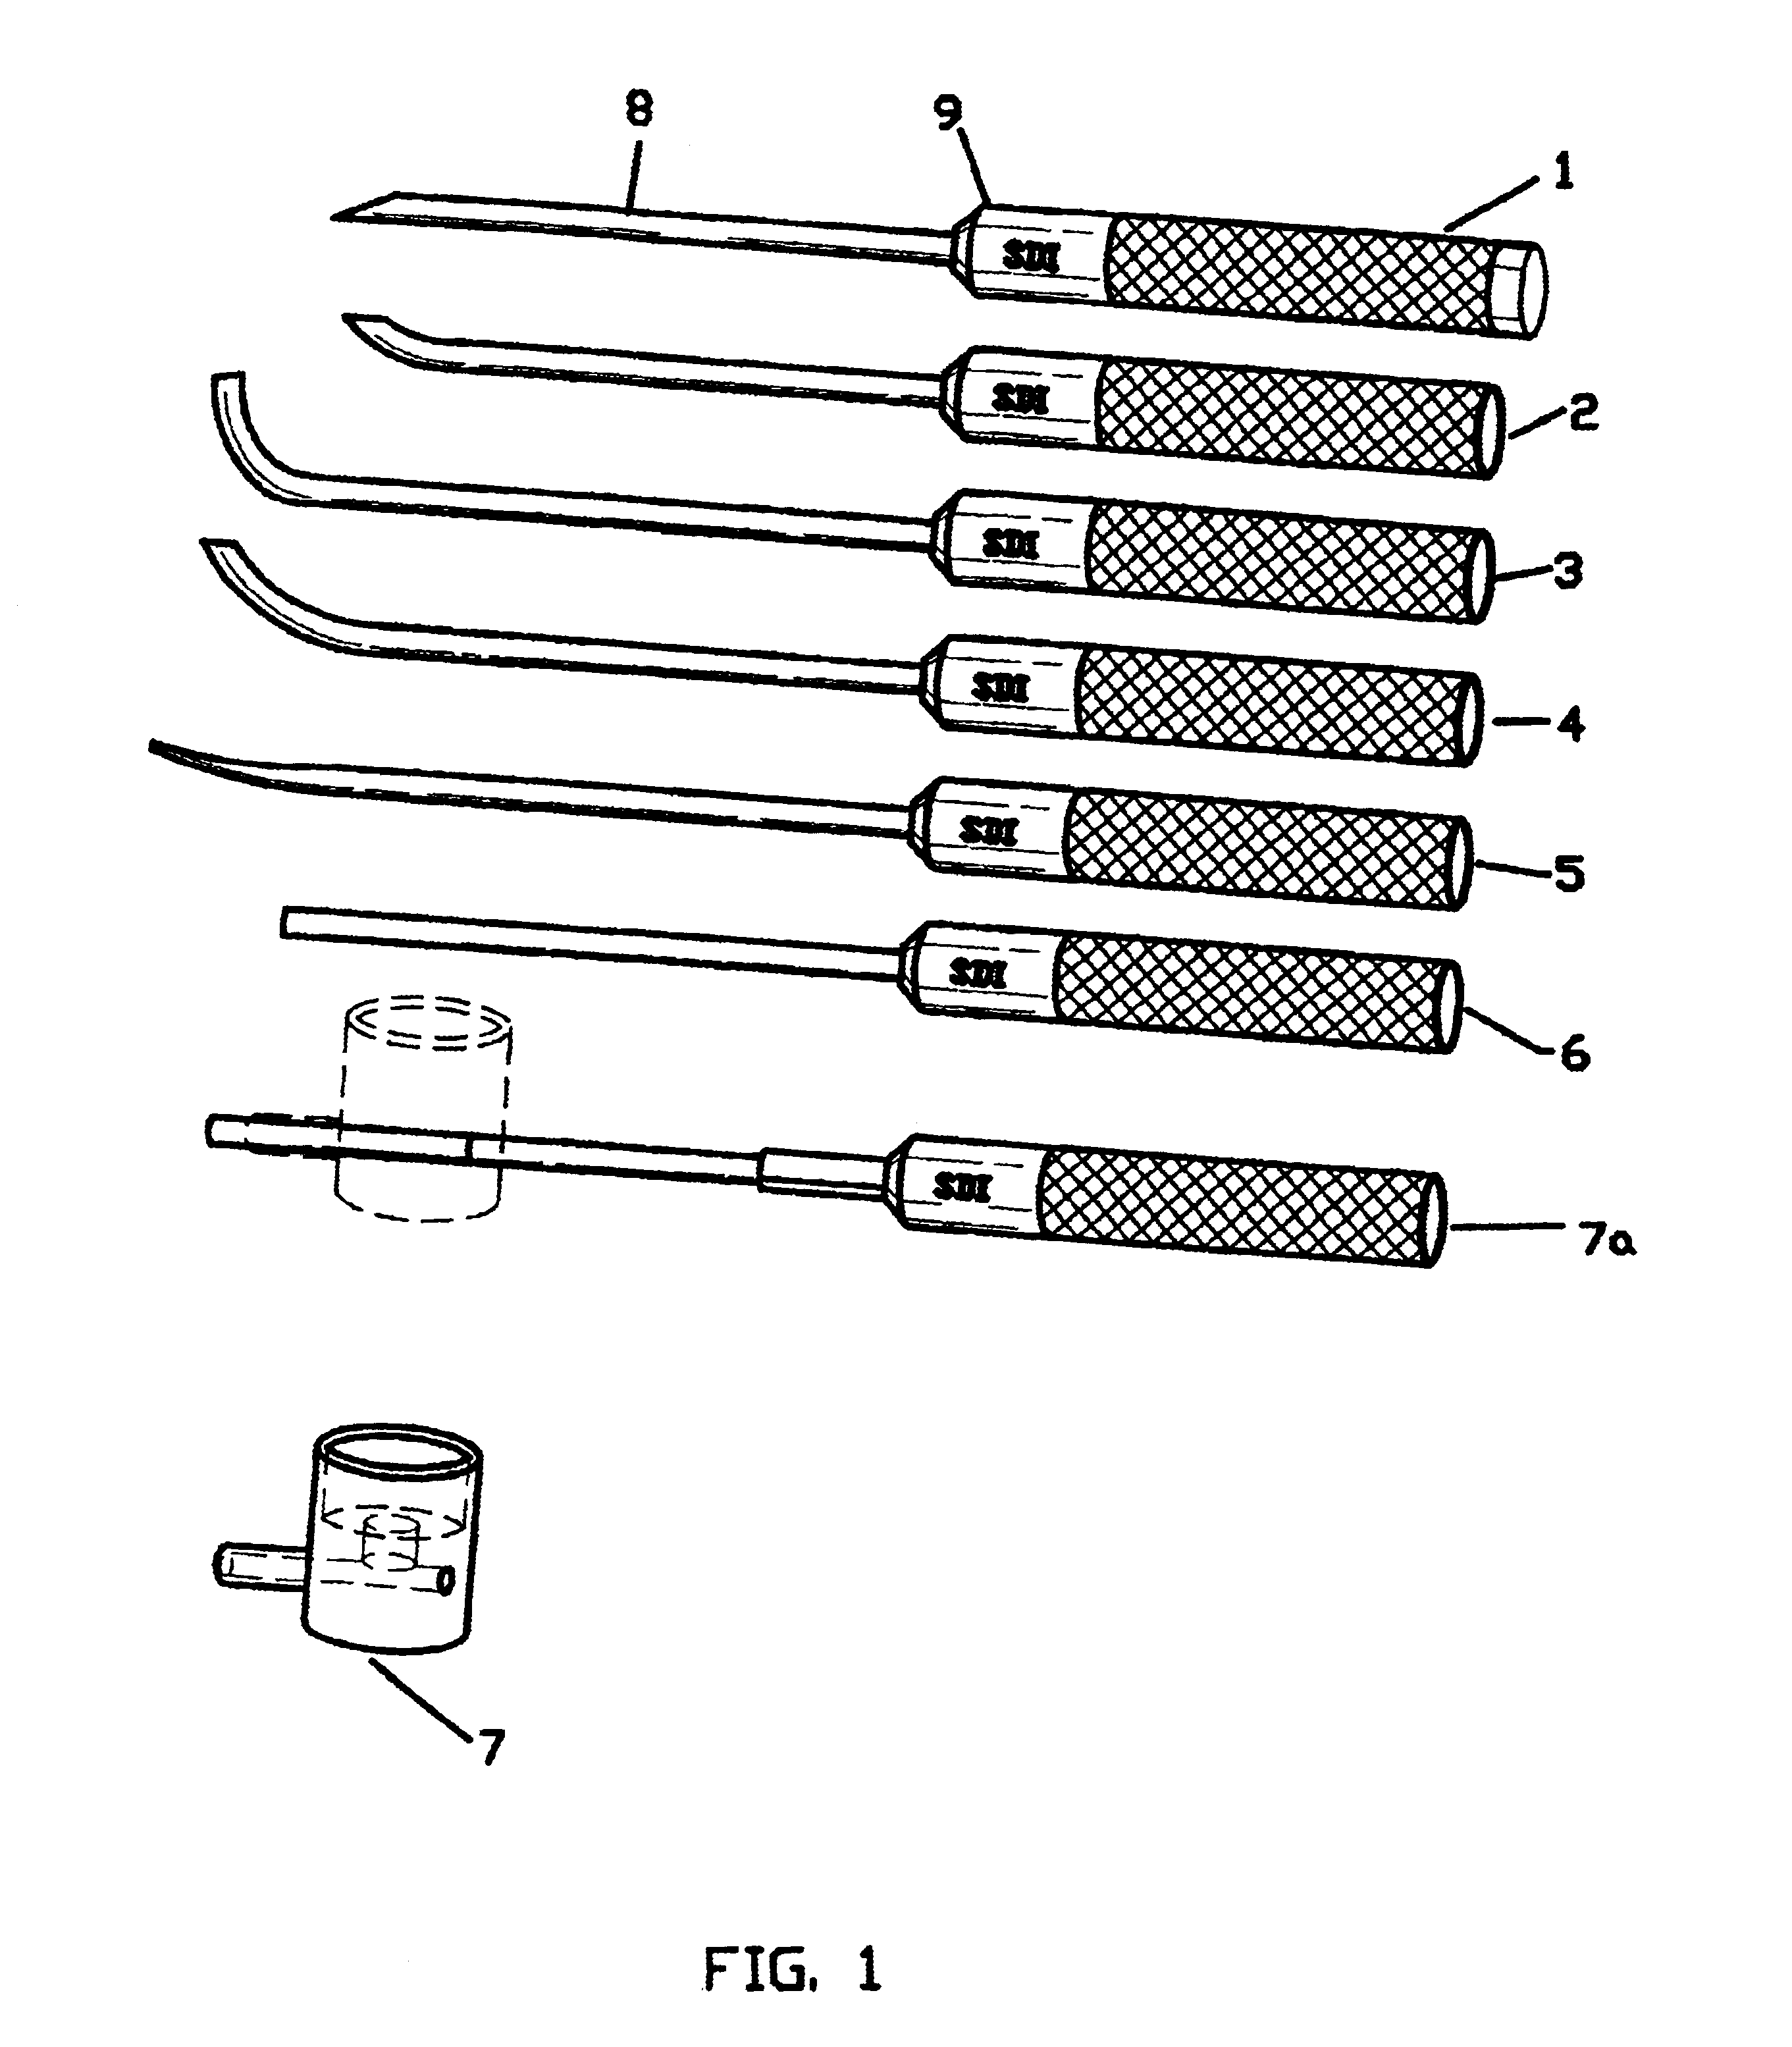 Process and instrumentation for arthroscopic reduction of central and peripheral depression fractures